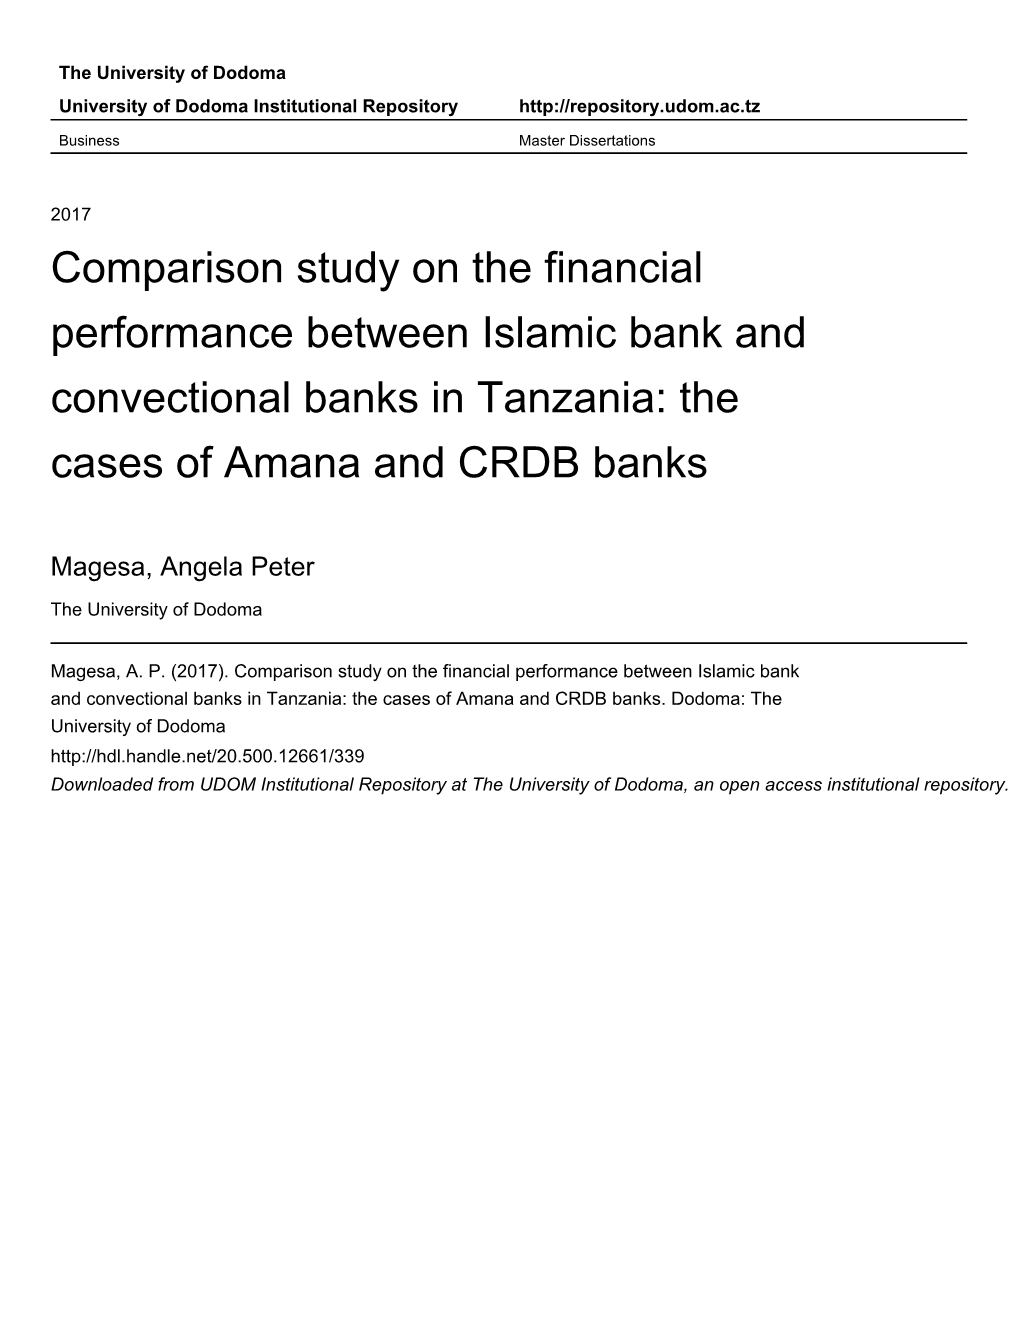 Comparison Study on the Financial Performance Between Islamic Bank and Convectional Banks in Tanzania: the Cases of Amana and CRDB Banks